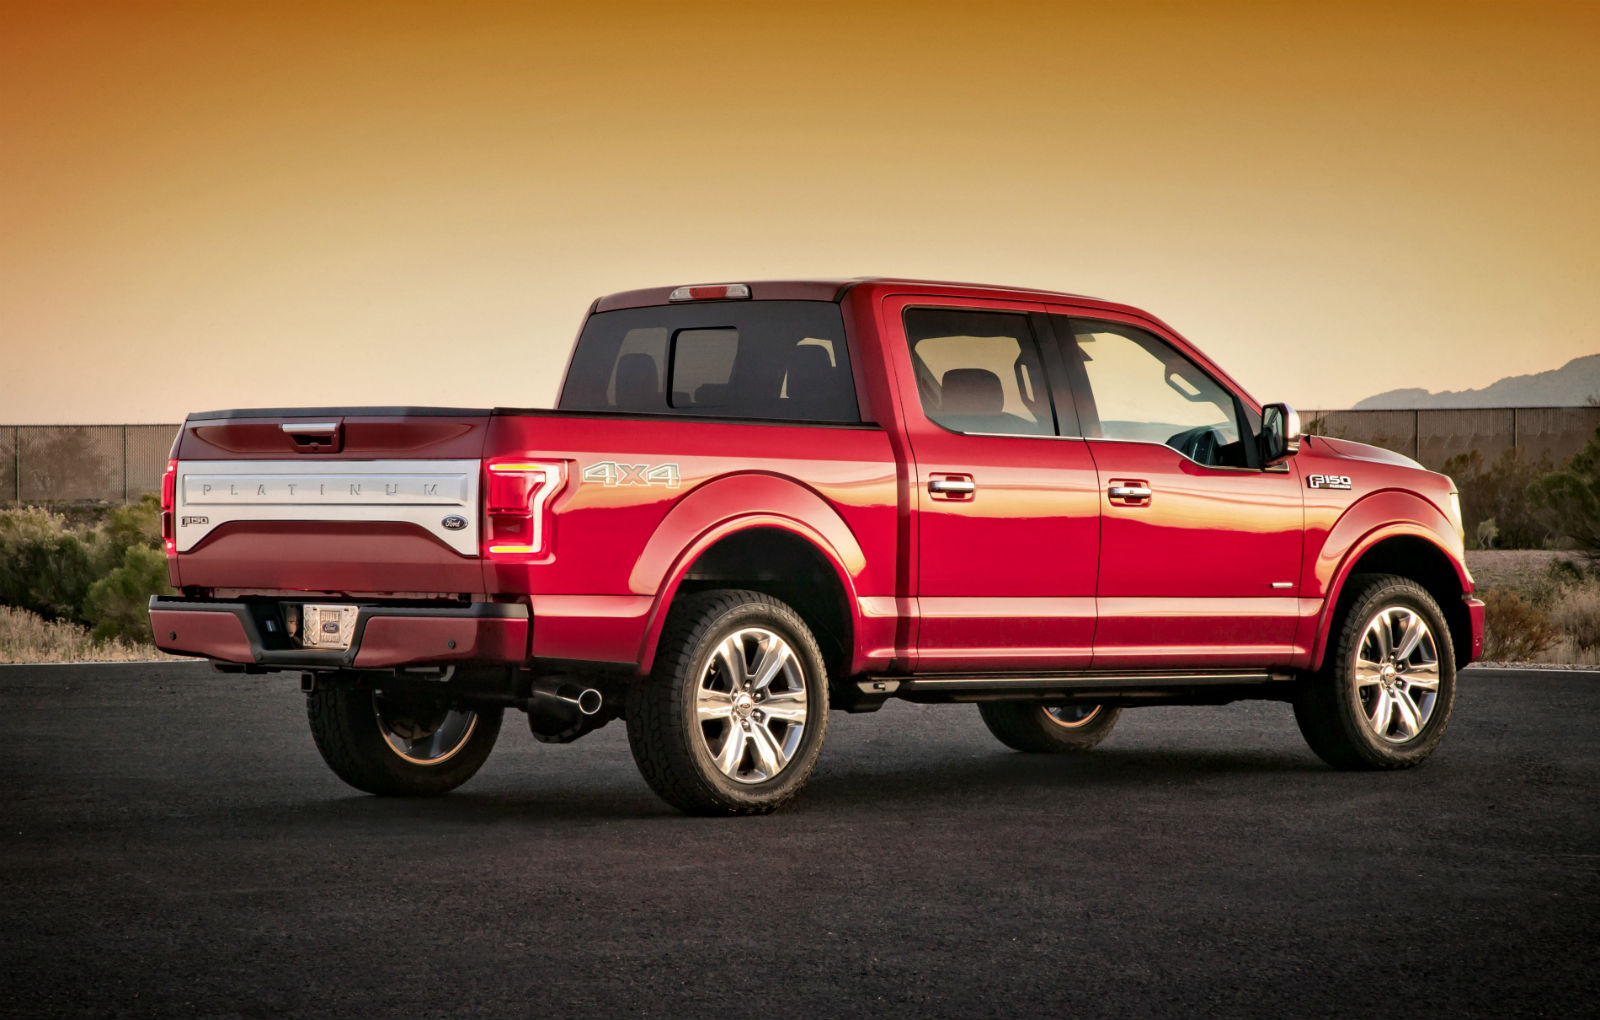 2015 Red Ford F 150 Wallpaper   HD